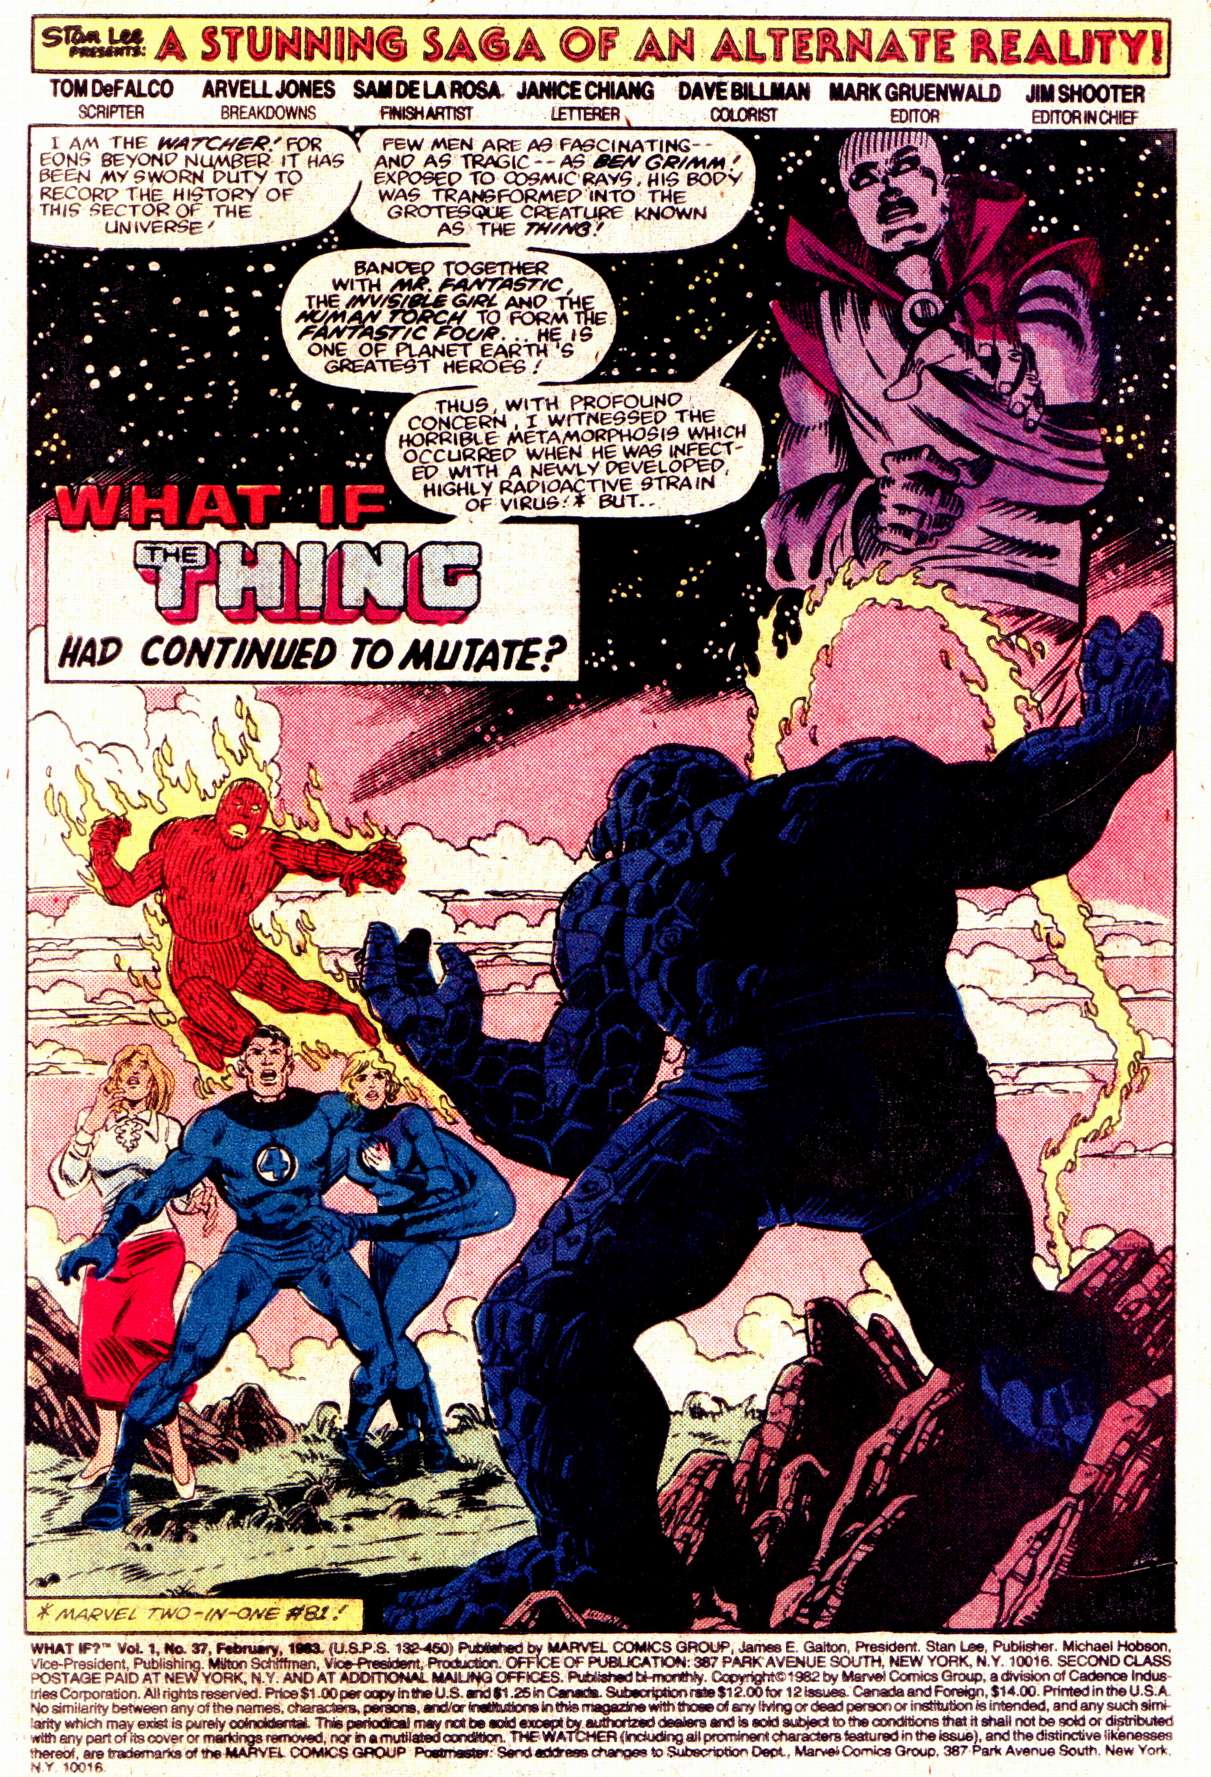 What If? (1977) #37_-_What_if_Beast_and_The_Thing_Continued_to_Mutate #37 - English 2